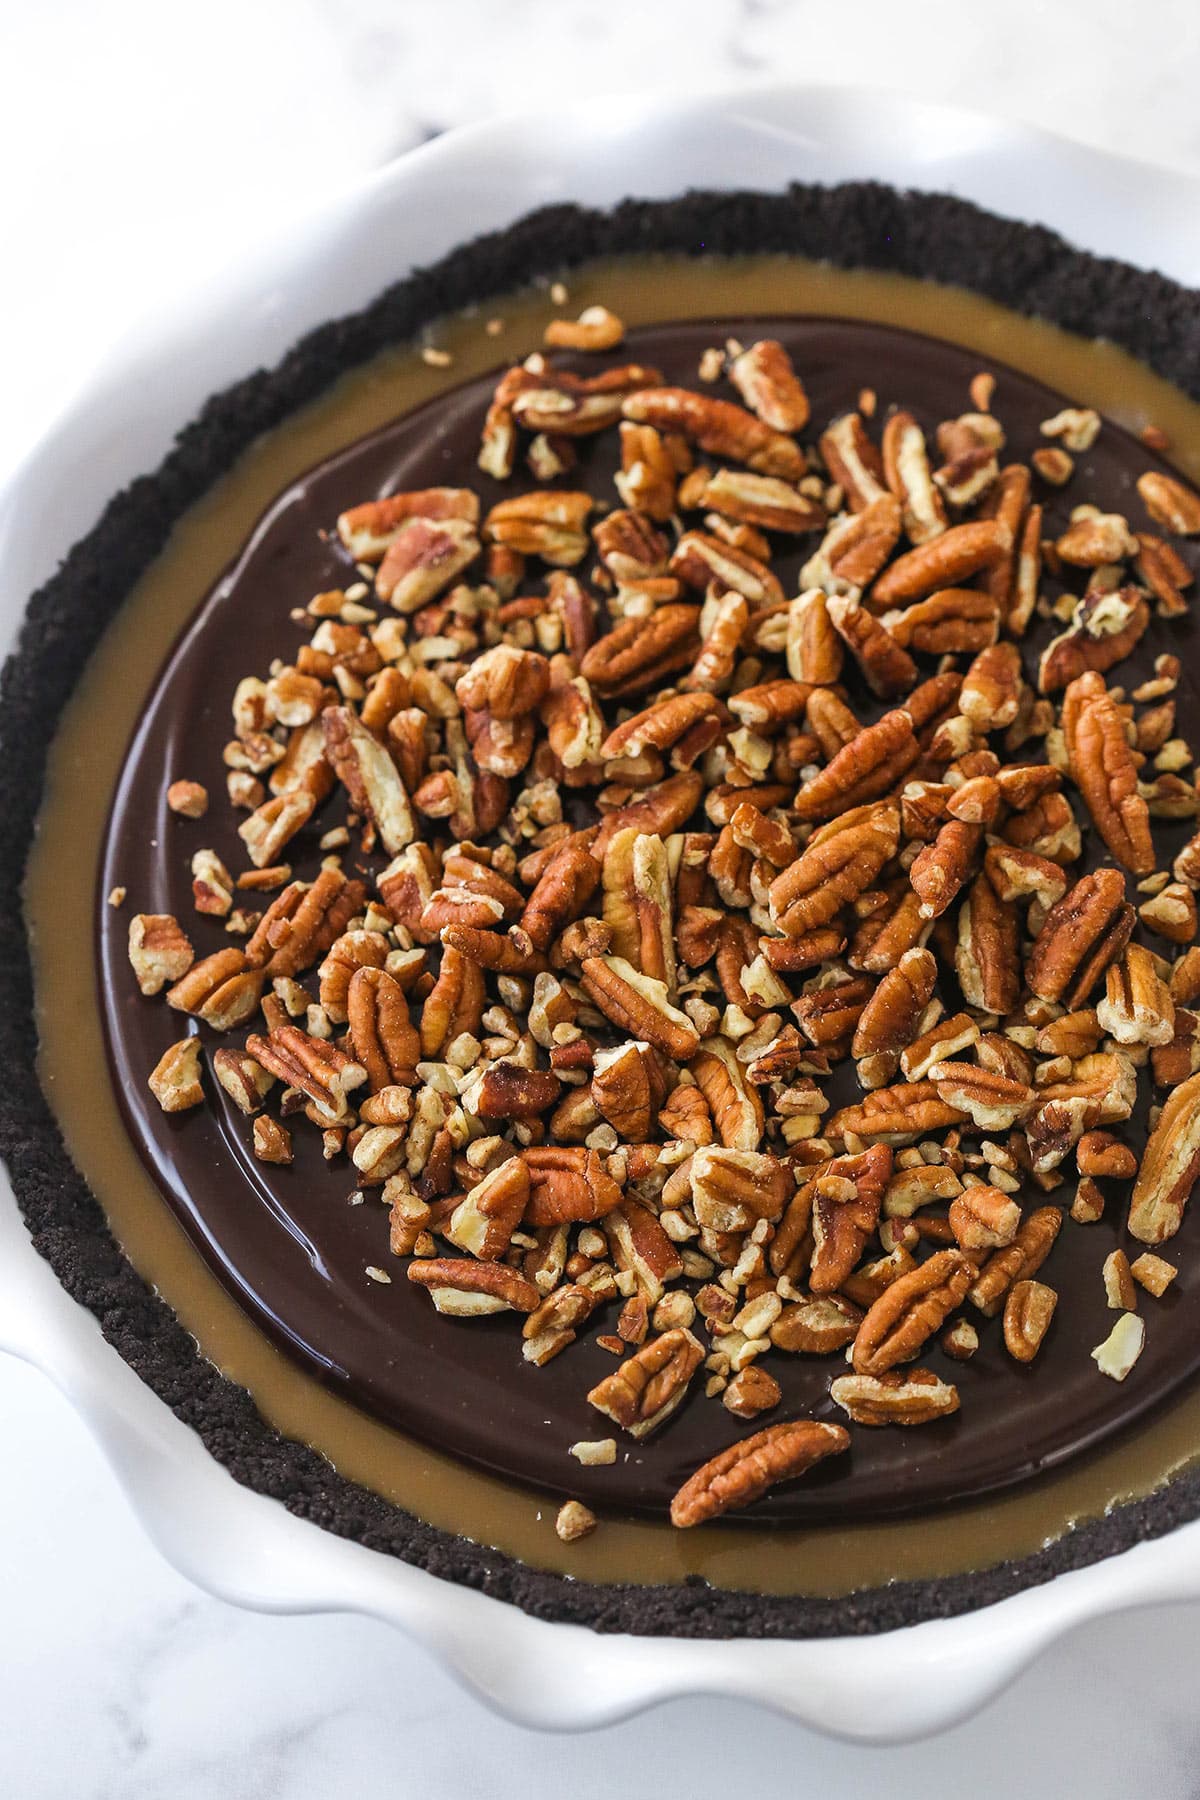 Overhead image of caramel turtle pie in a pie dish.